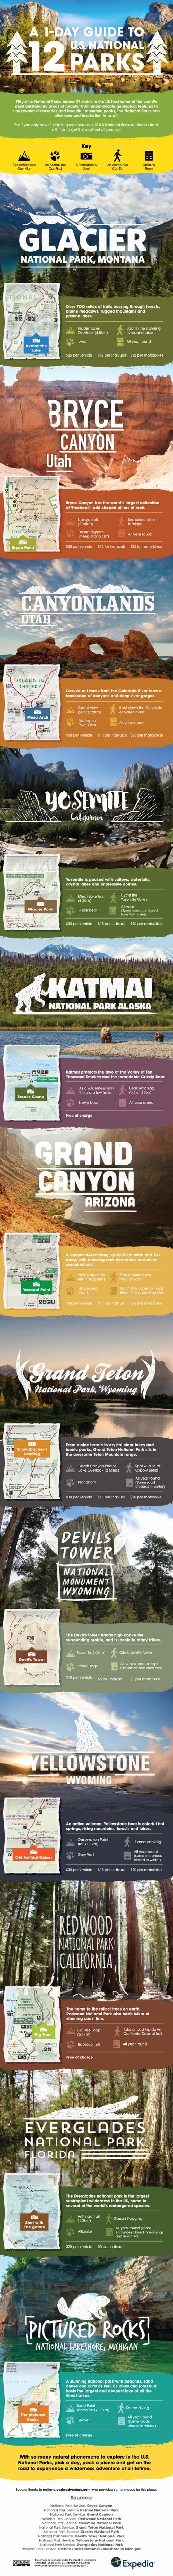 One Day Guide to US National Parks Infographic